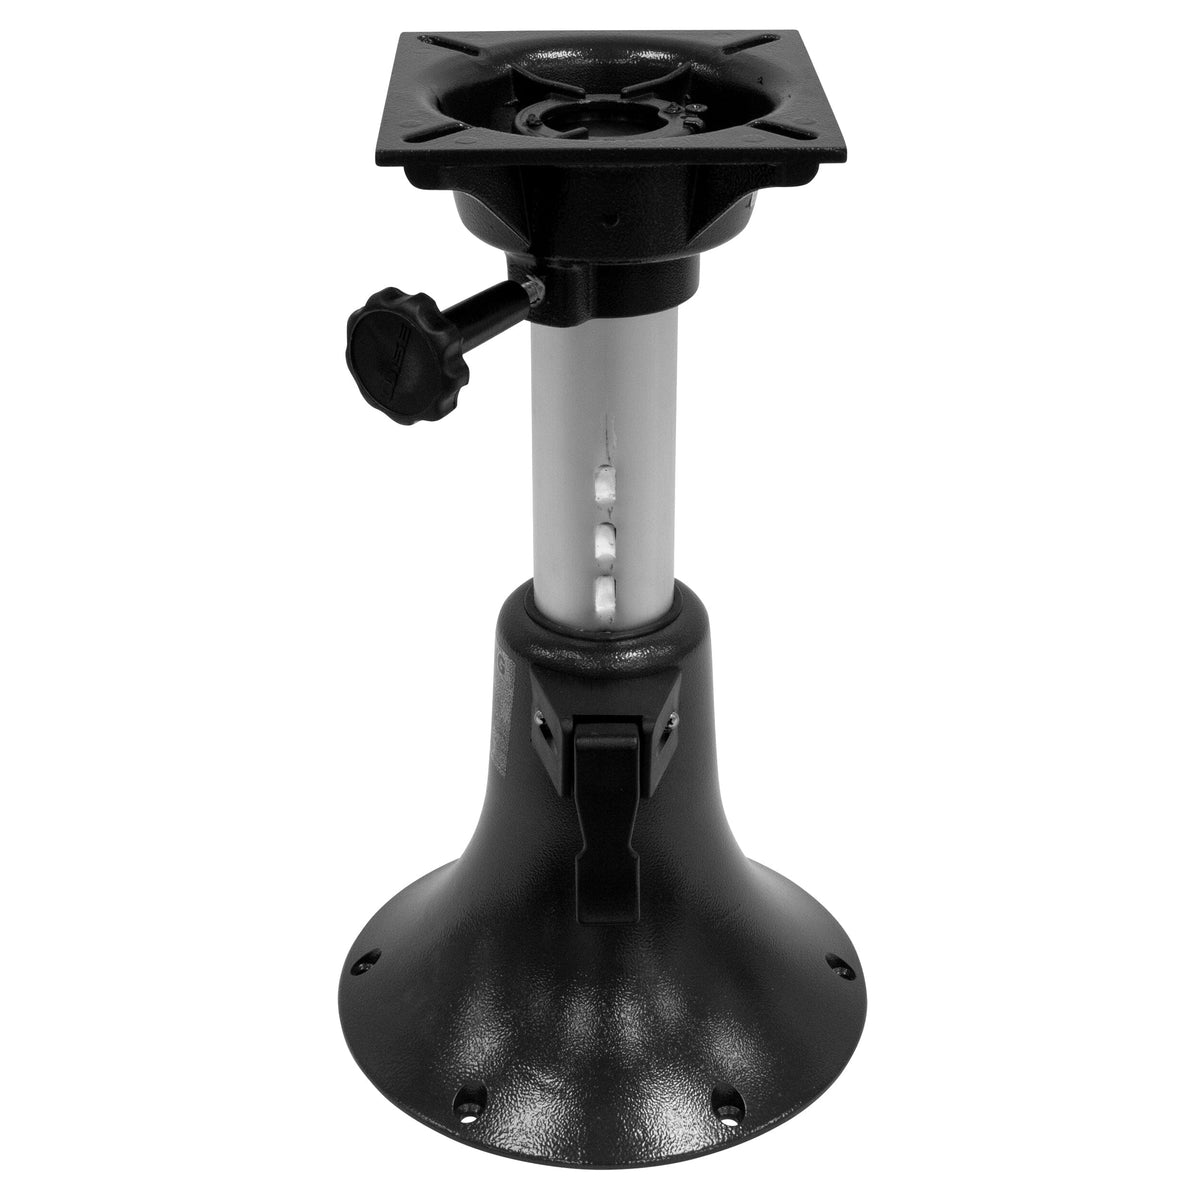 Wise 8WD1500 Adjustable Bell Pedestal w/ Seat Spider Mount – Boatseats